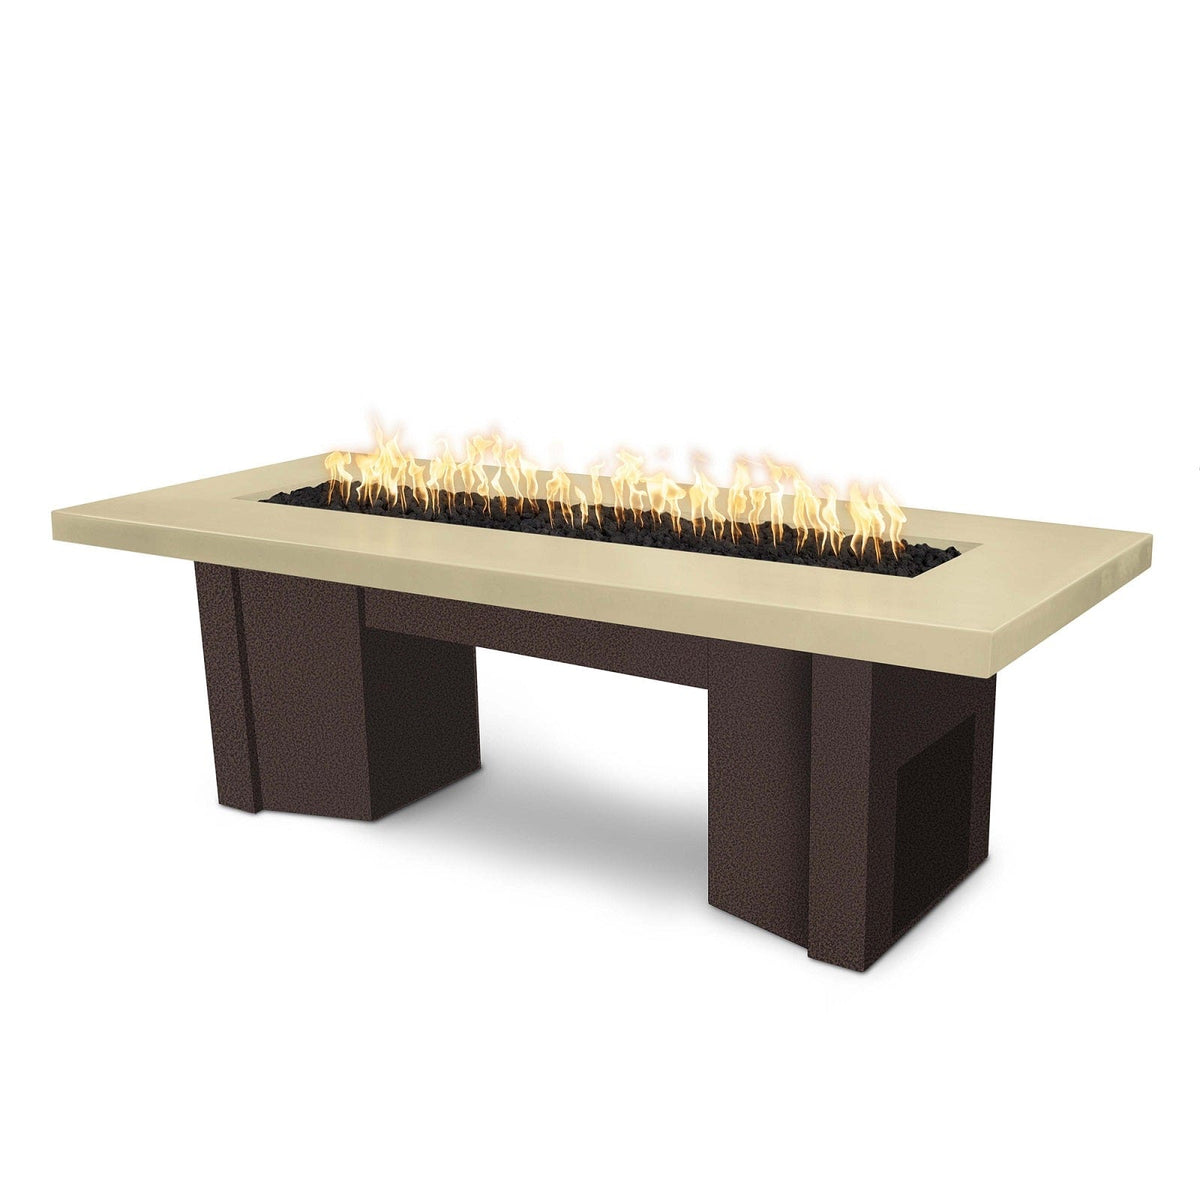 The Outdoor Plus Fire Features Vanilla (-VAN) / Copper Vein Powder Coated Steel (-CPV) The Outdoor Plus 78&quot; Alameda Fire Table Smooth Concrete in Liquid Propane - Match Lit with Flame Sense System / OPT-ALMGFRC78FSML-LP